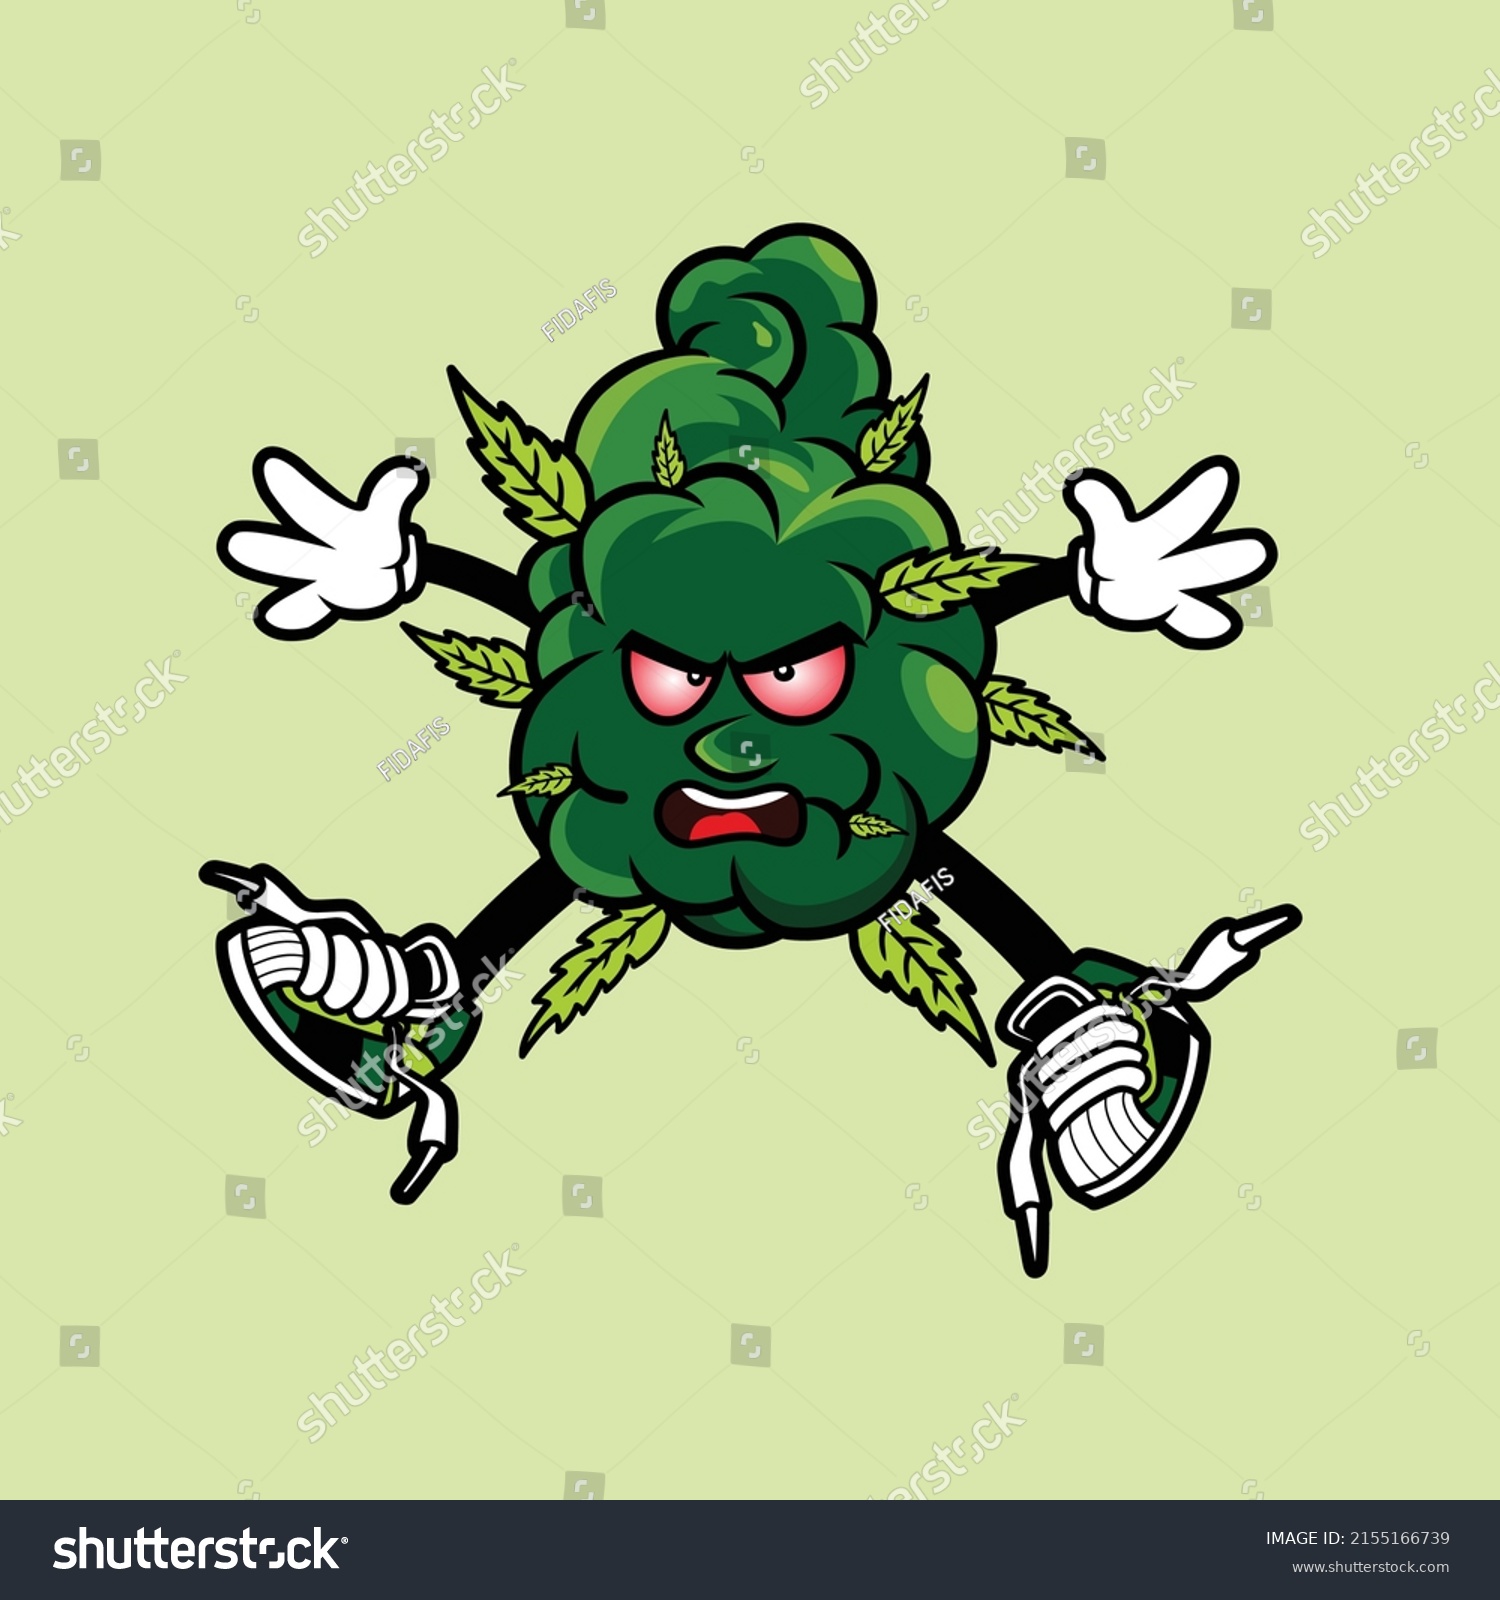 Angry Character Cannabis Leaf Buds Design Stock Vector (Royalty Free ...